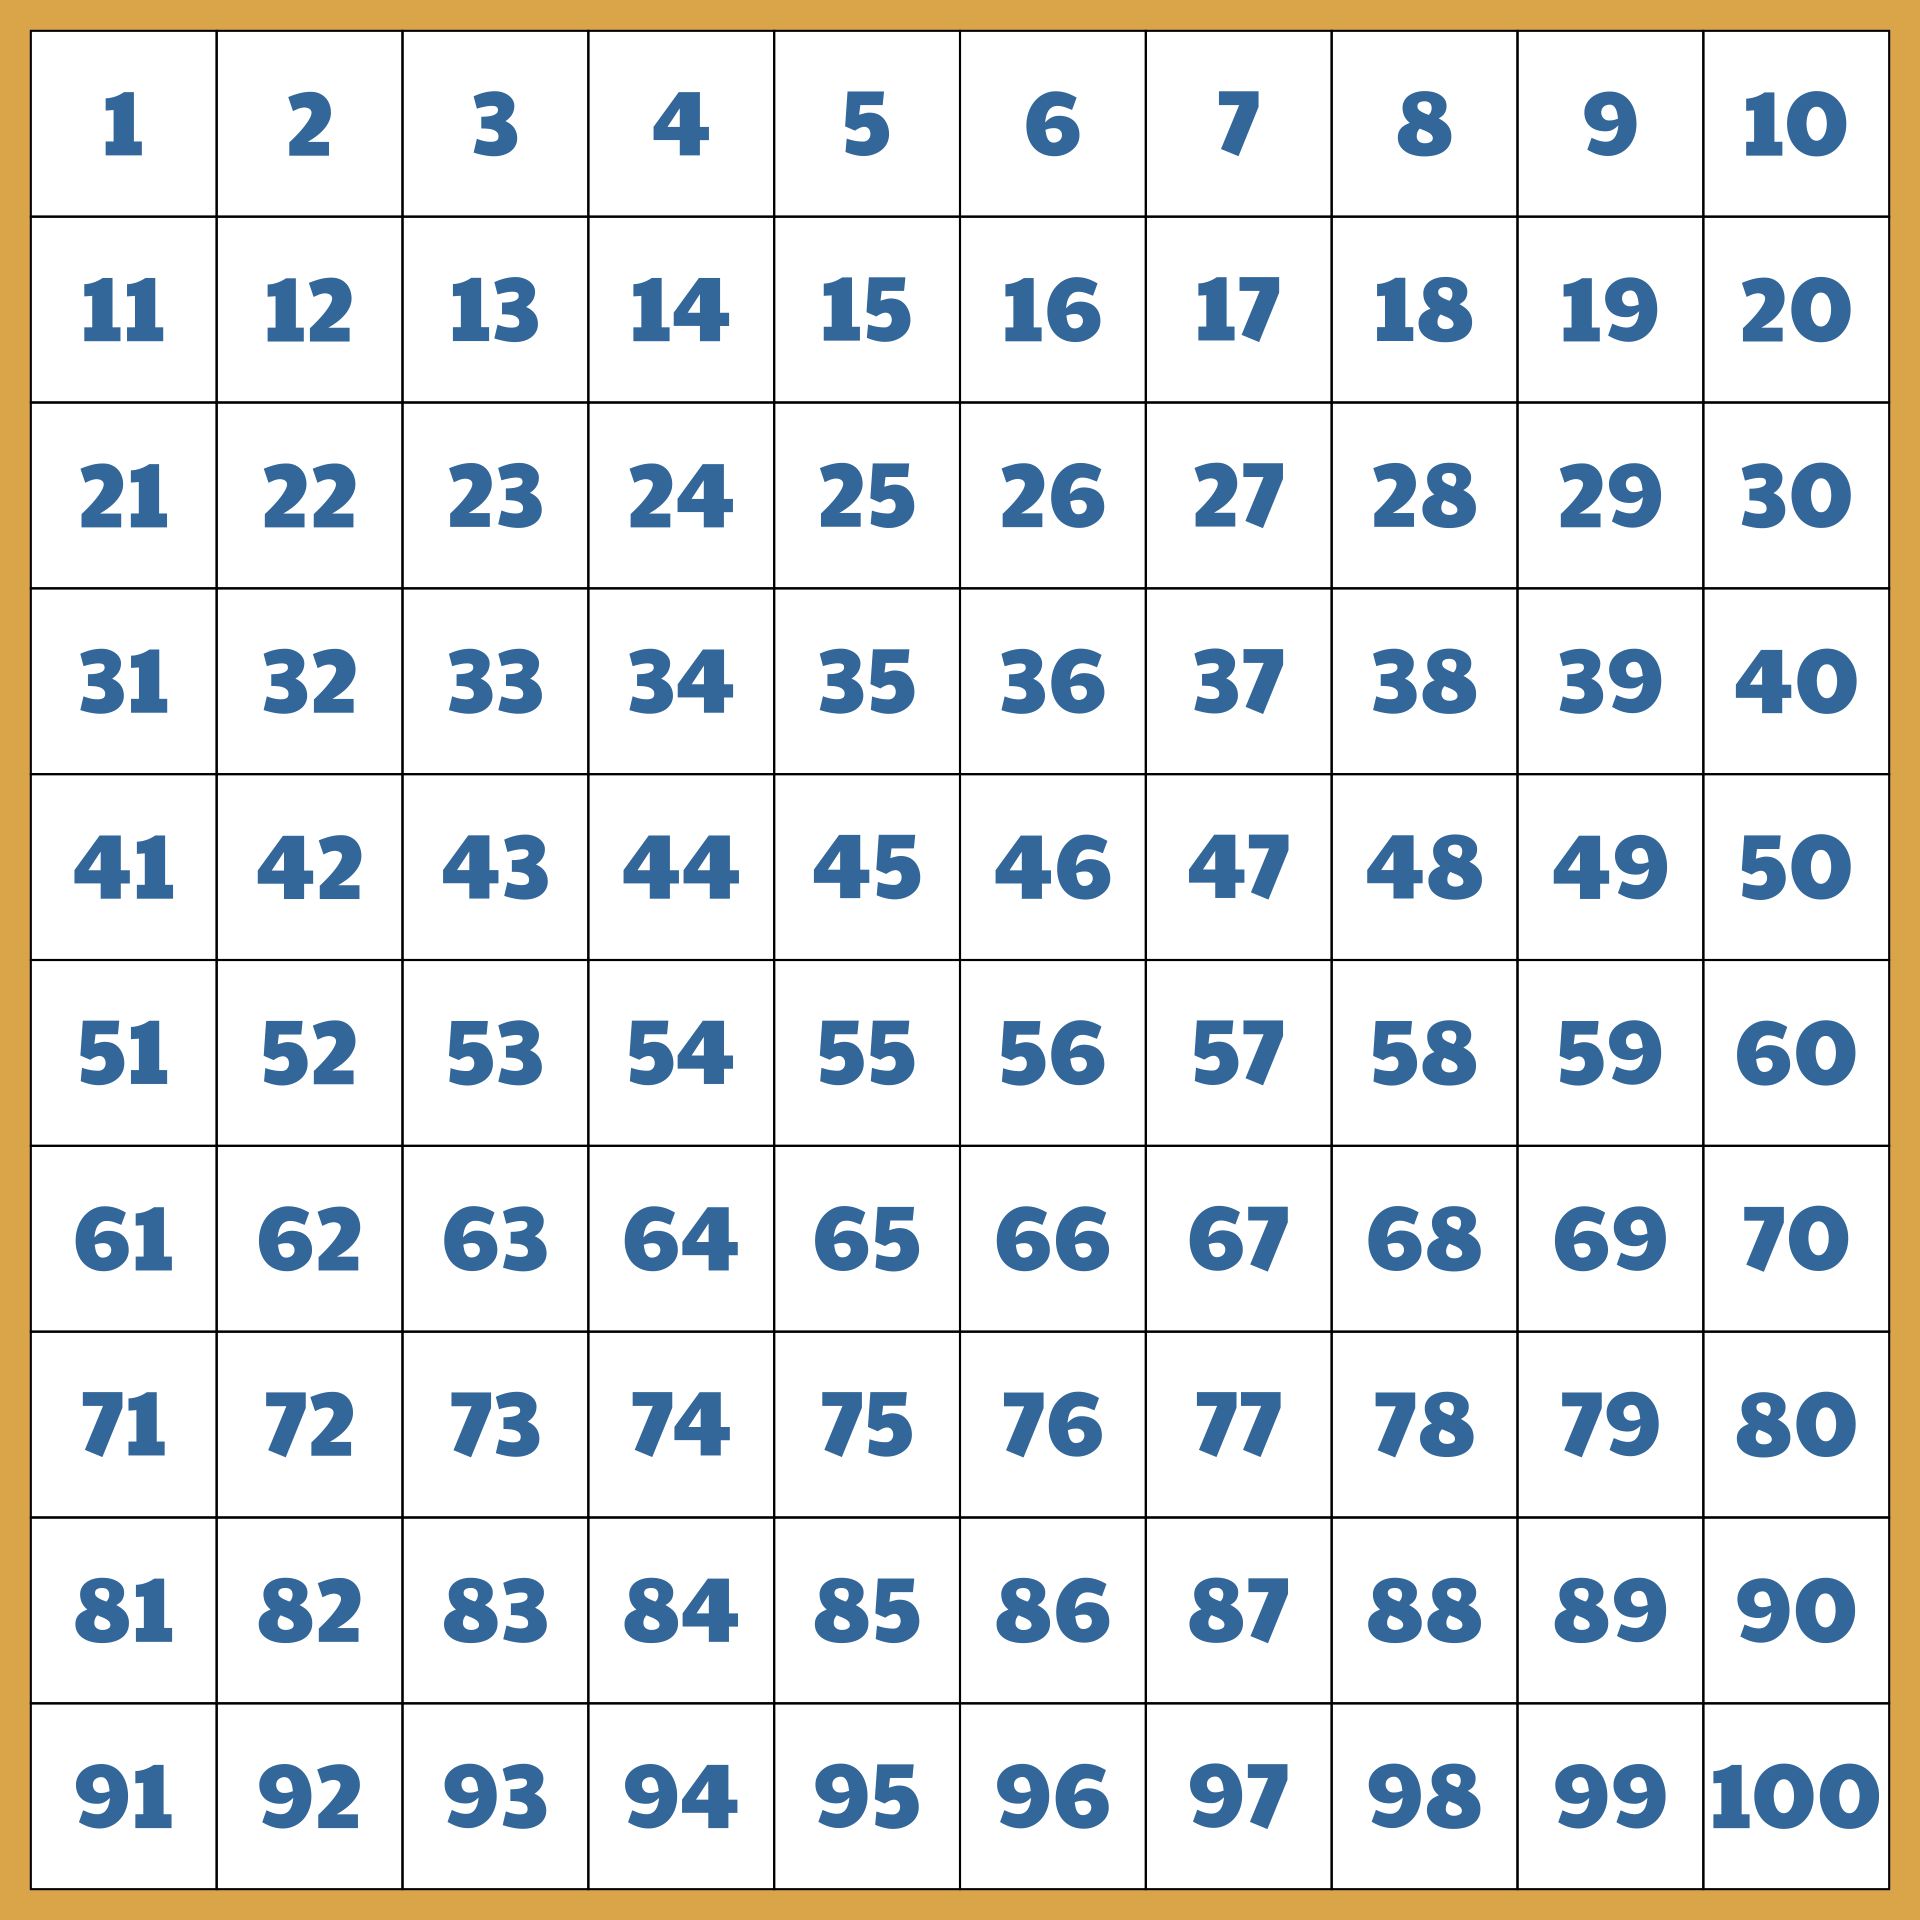 6-best-images-of-printable-hundred-square-printable-100-square